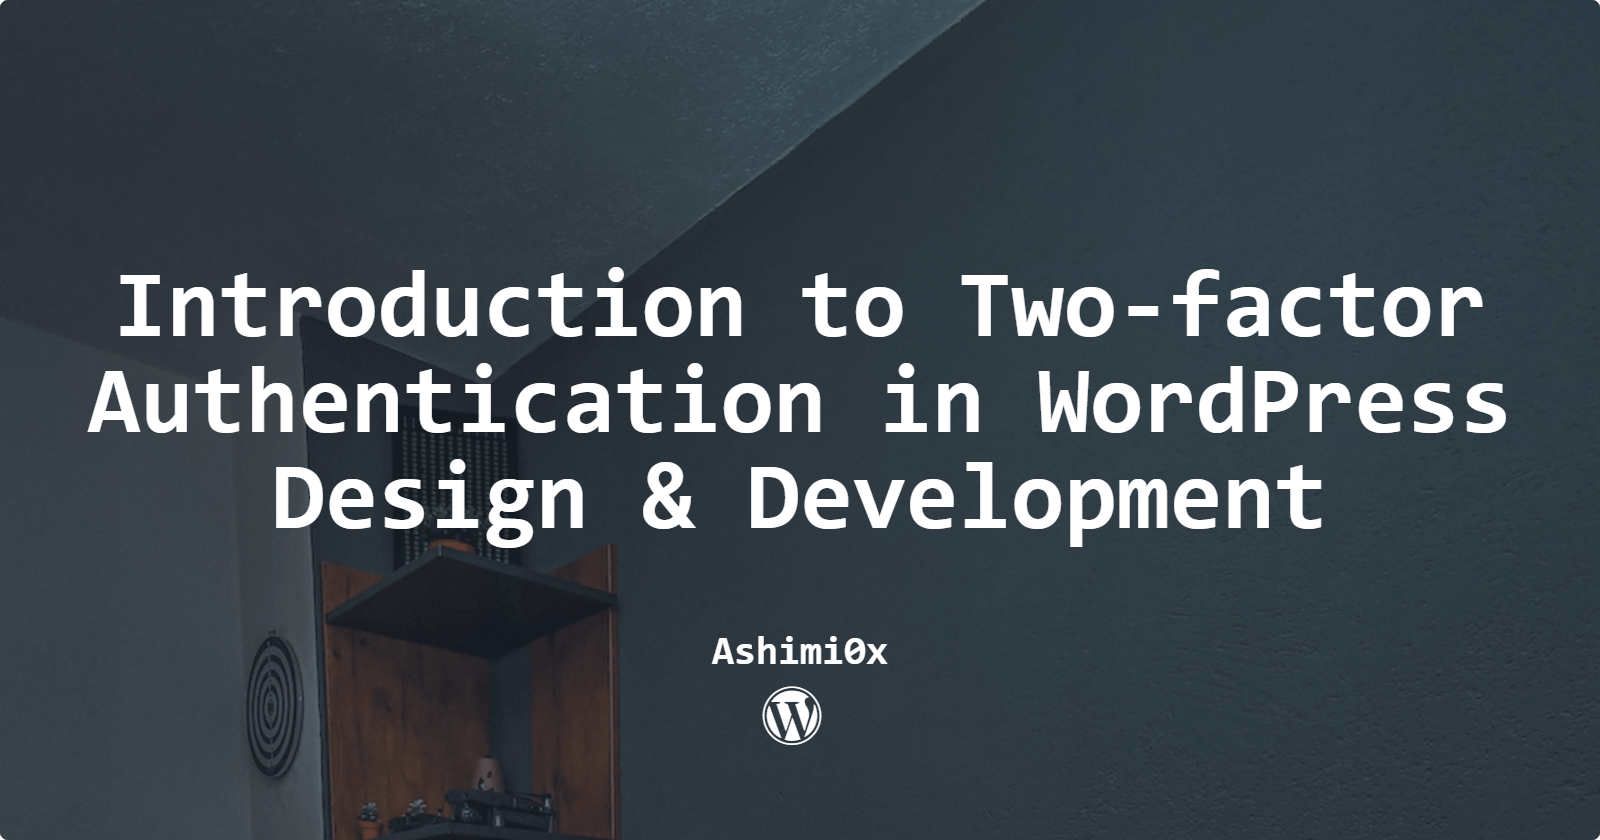 Introduction to Two-factor Authentication in WordPress Design & Development